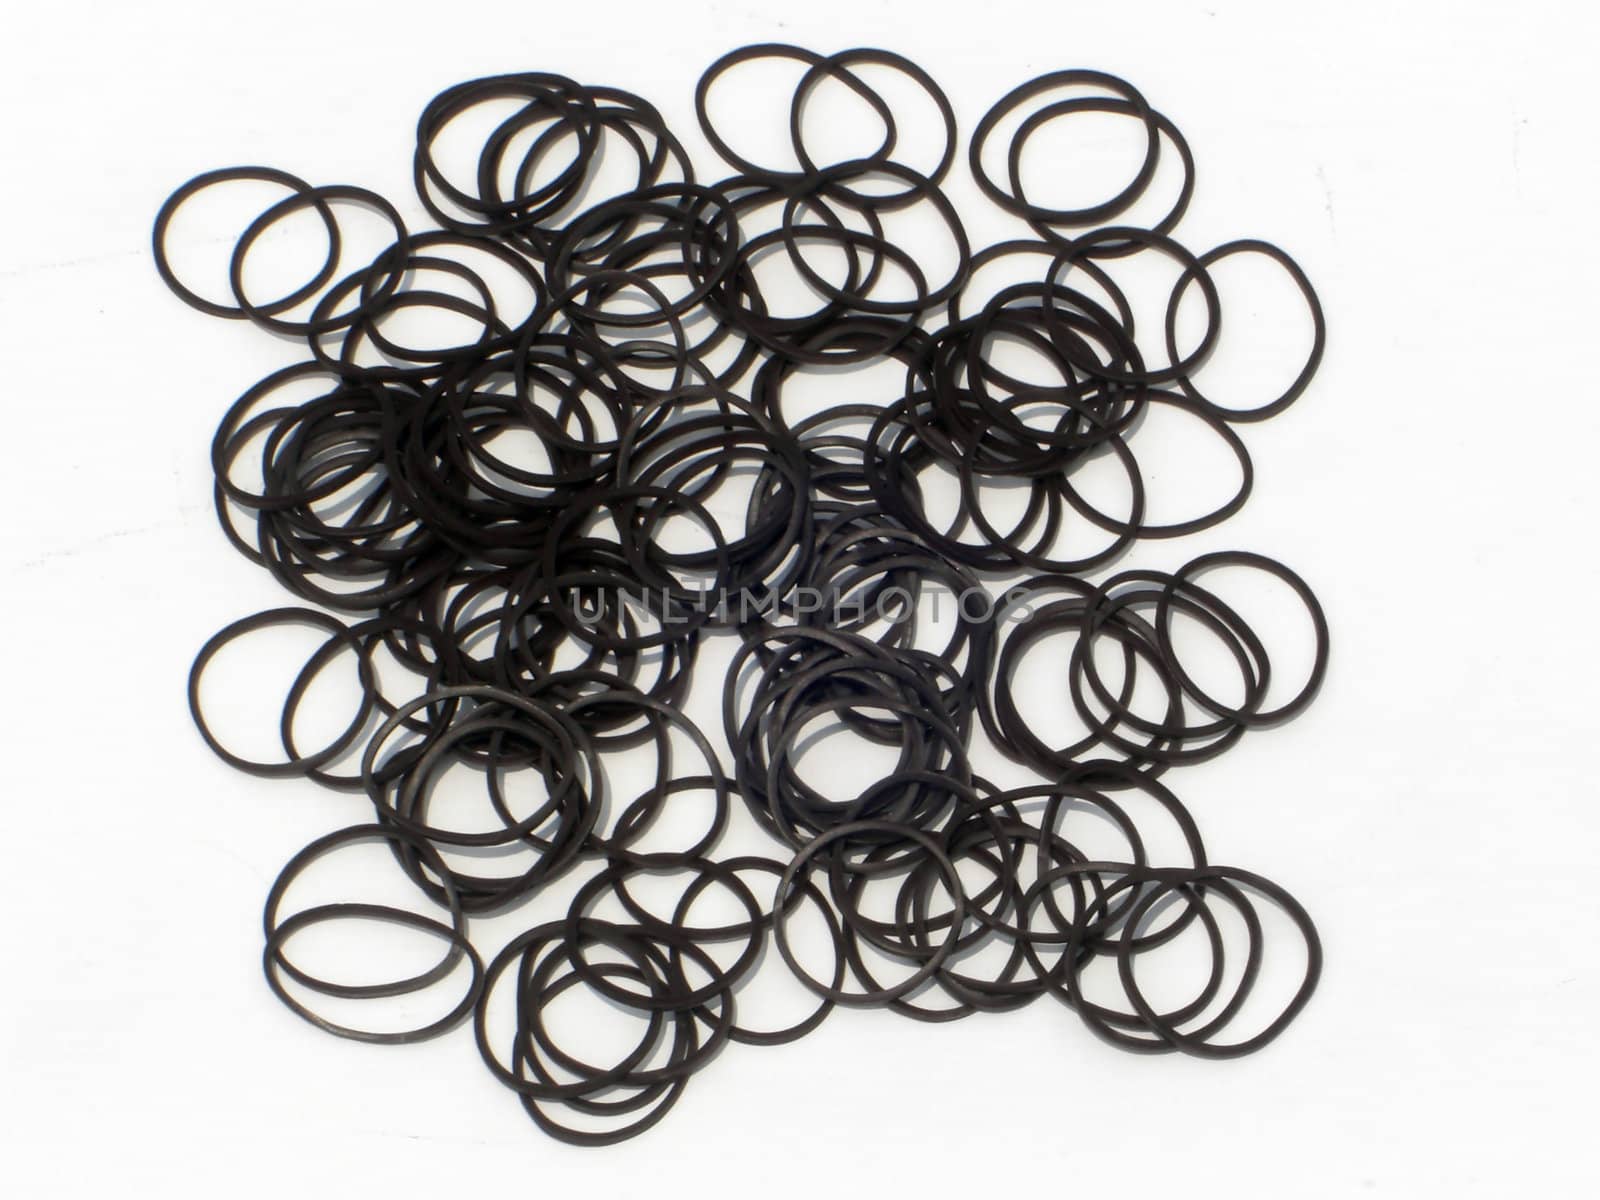 A pile of brown rubber bands are scattered in a neat pile.